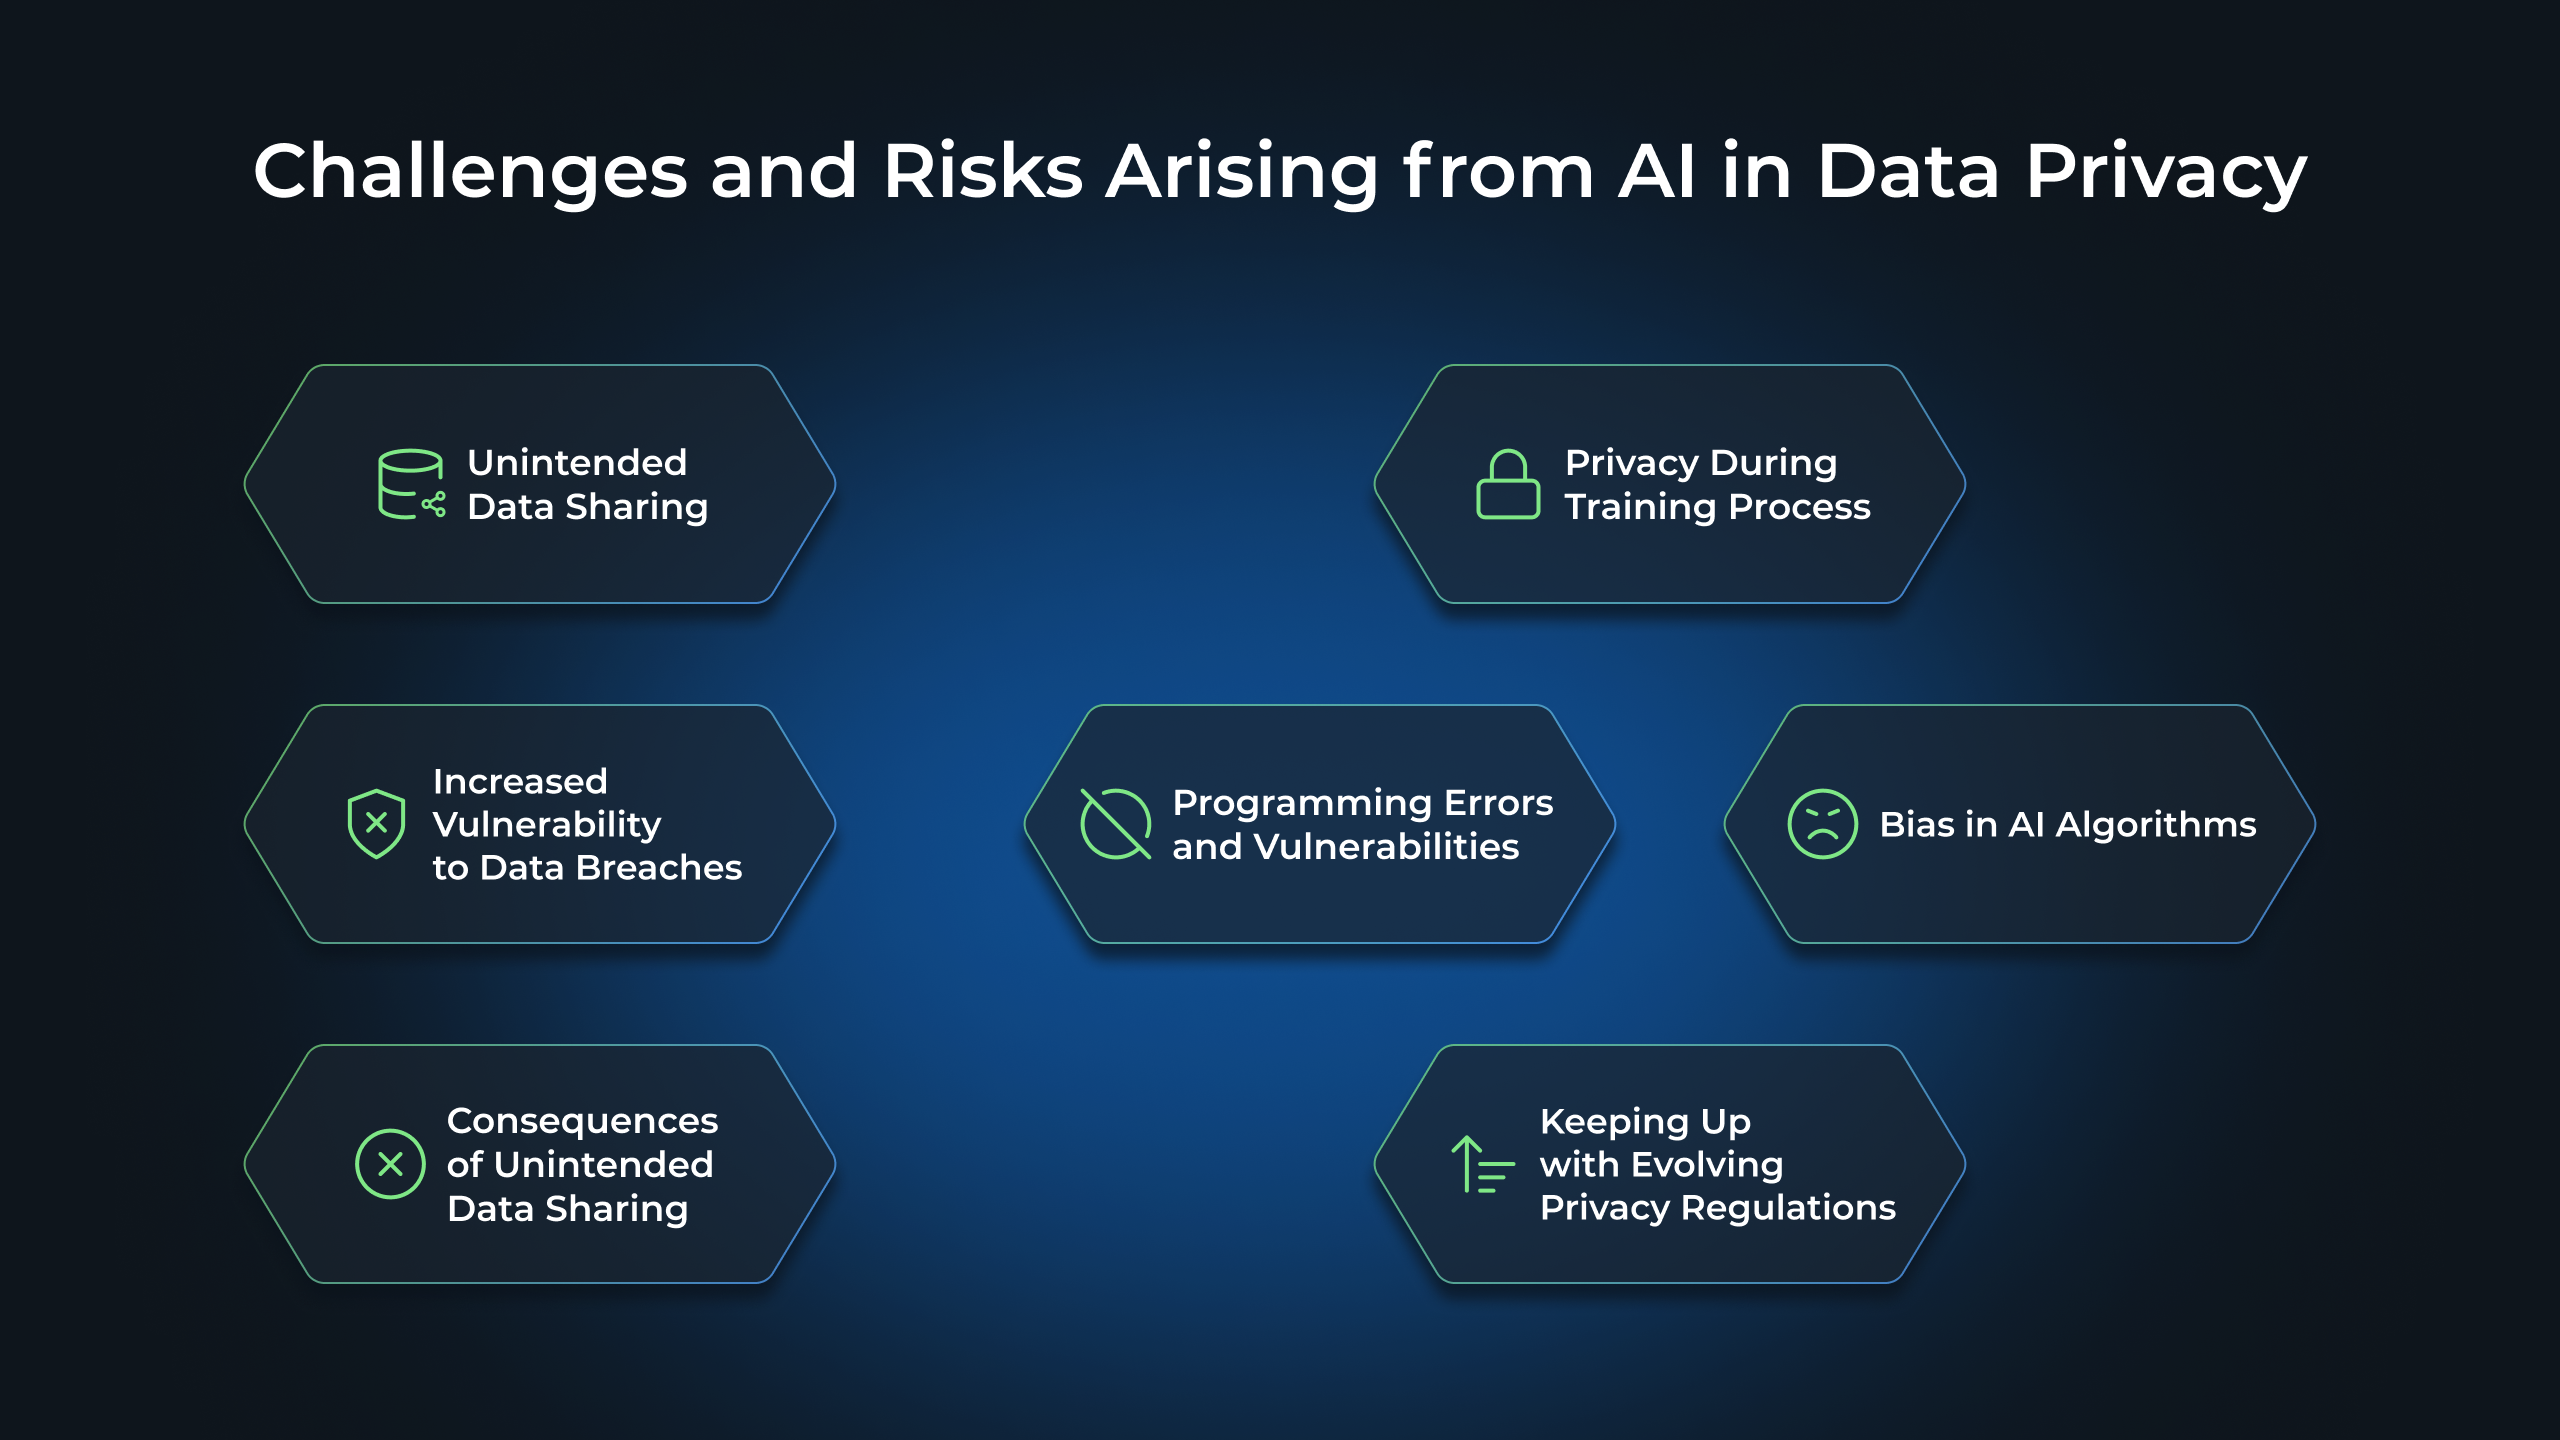 Challenges and Risks Arising from AI in Data Privacy: Unintended Data Sharing, Increased Vulnerability to Data Breaches, Consequences of Unintended Data Sharing, Privacy During Training Process, Programming Errors and Vulnerabilities, Bias in AI Algorithms, Keeping Up with Evolving Privacy Regulations
